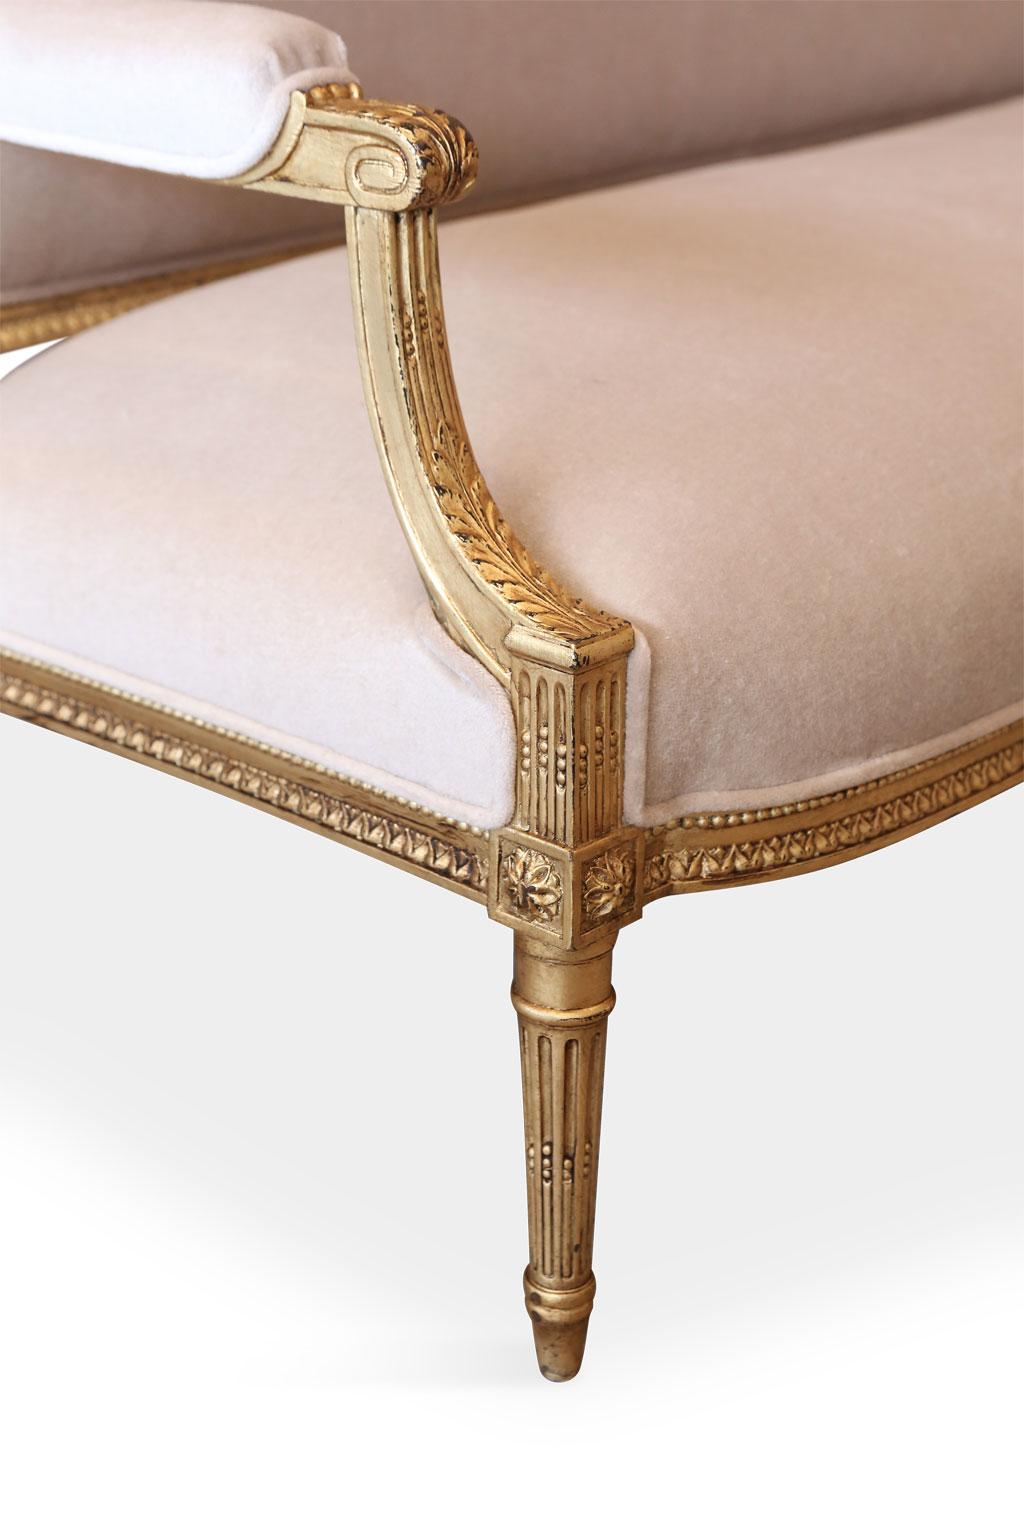 Gilded French settee, hand-carved late 19th century. Newly-upholstered in Coraggio beige-taupe mohair with back covered in taupe and smoke tiger stripe print mohair.